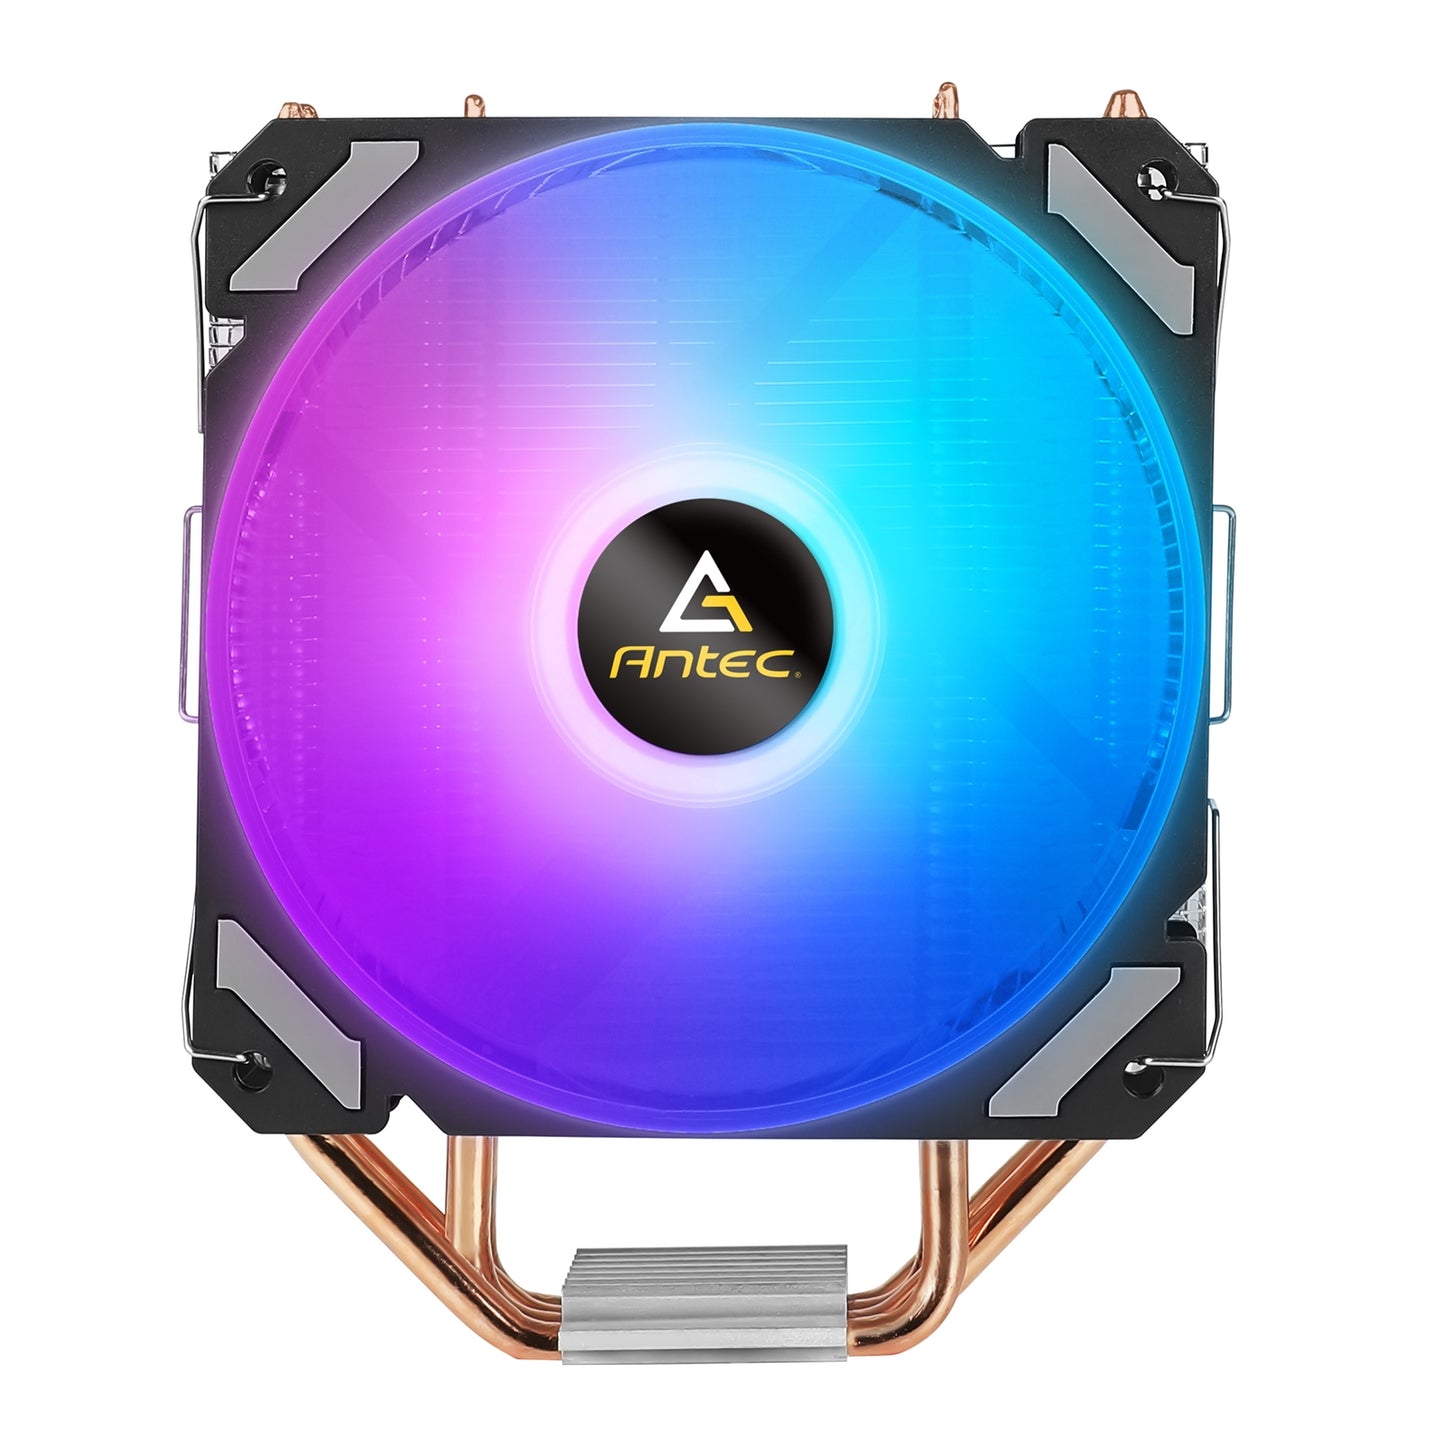 Antec A400i Tower Air PC CPU Cooler With RGB Lights 0-761345-10913-0